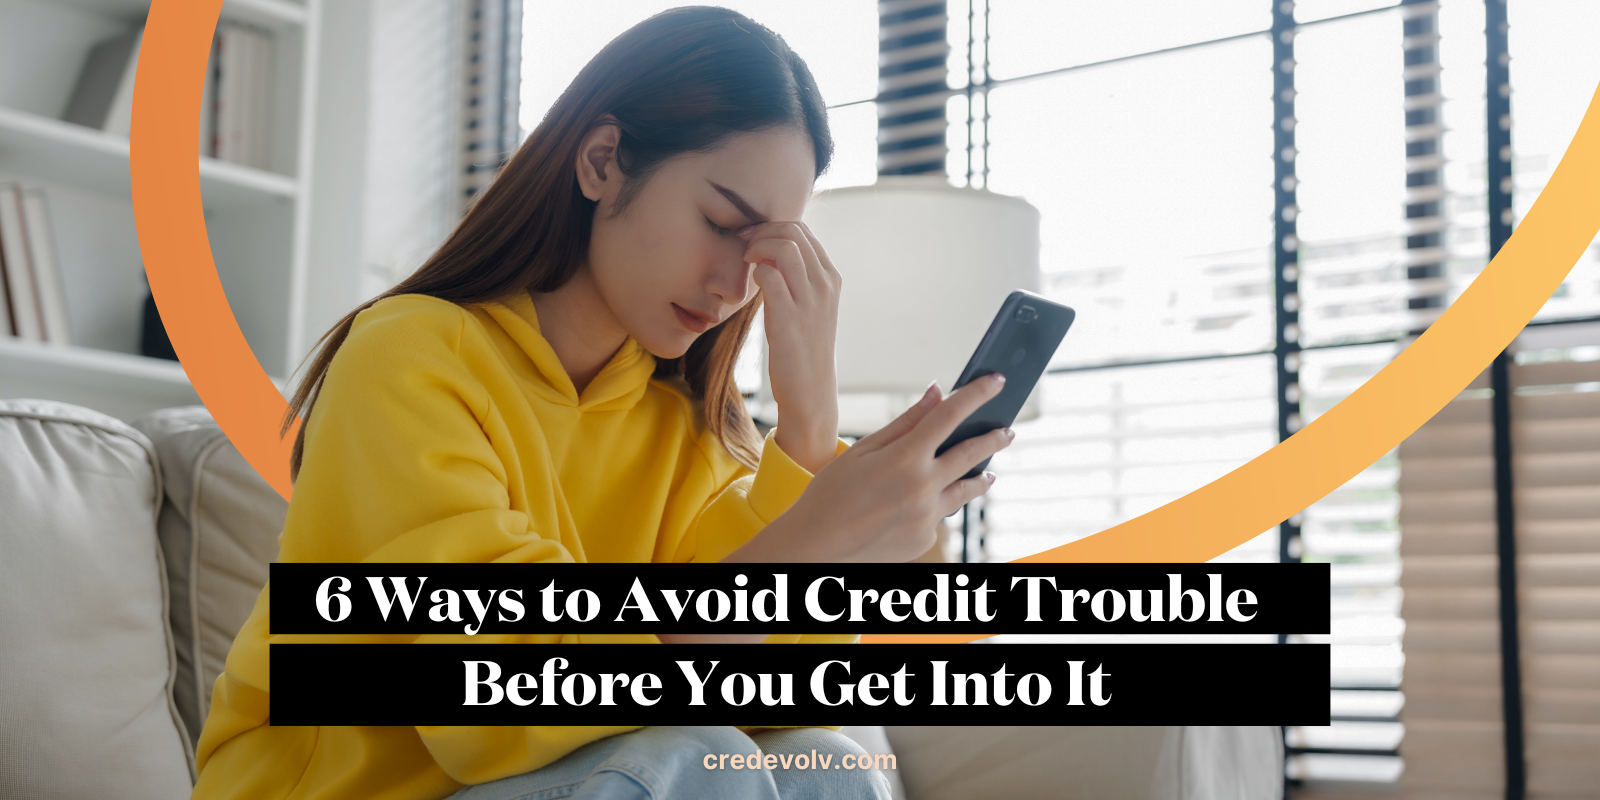 CredEvolv Blog - Featured Image - 6 Ways to Avoid Credit Trouble Before You Get Into It